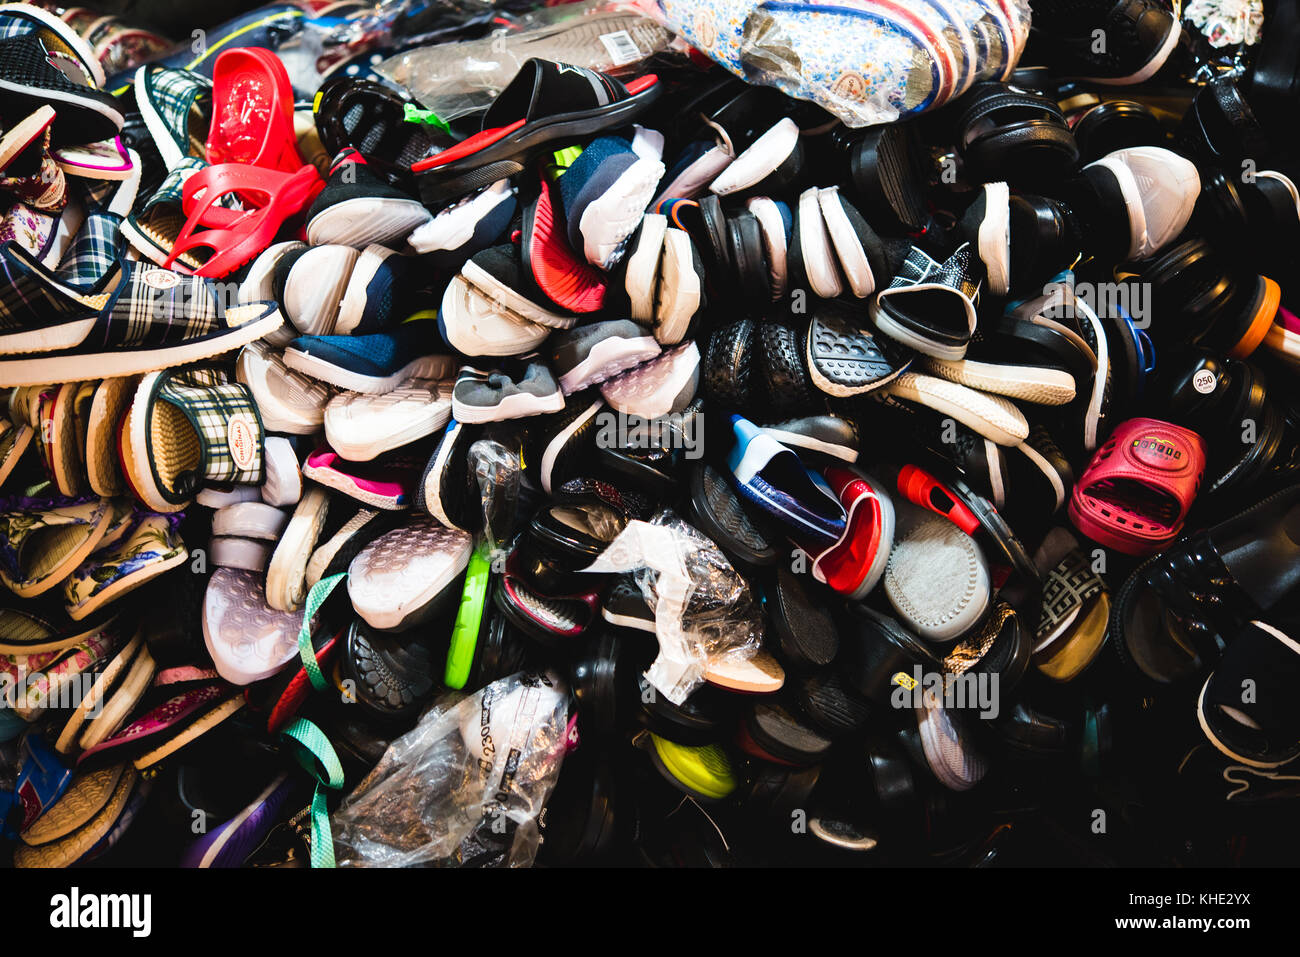 A pile of shoes being sold at Kwangjang Market, Seoul 2017. Stock Photo